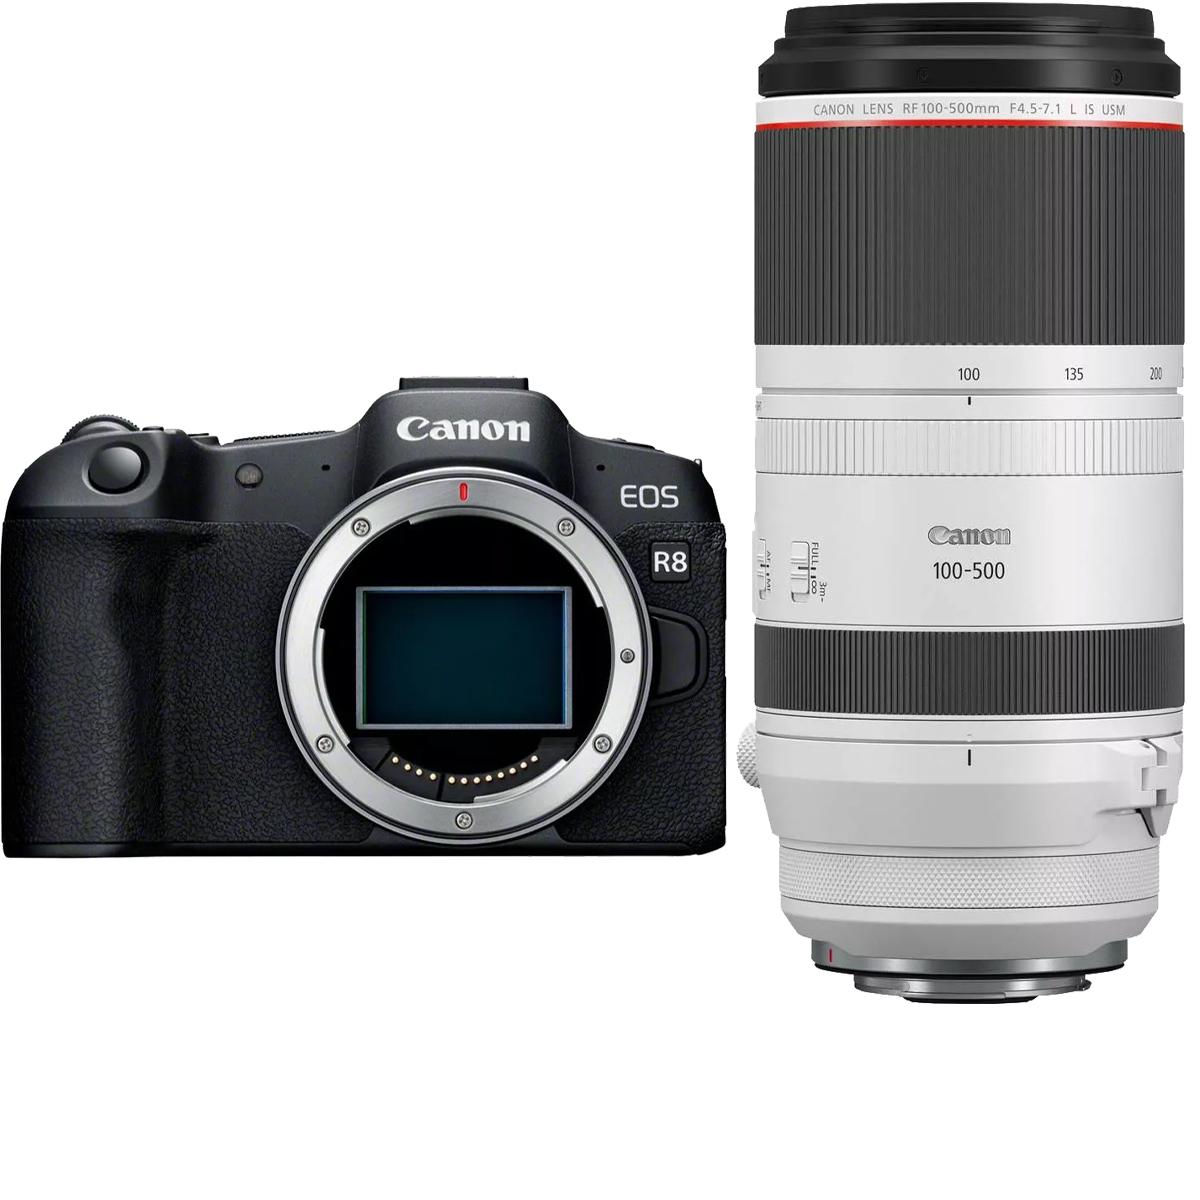 Canon EOS R8 + Canon RF 100-500 mm 1:4.5-7.1 L IS USM